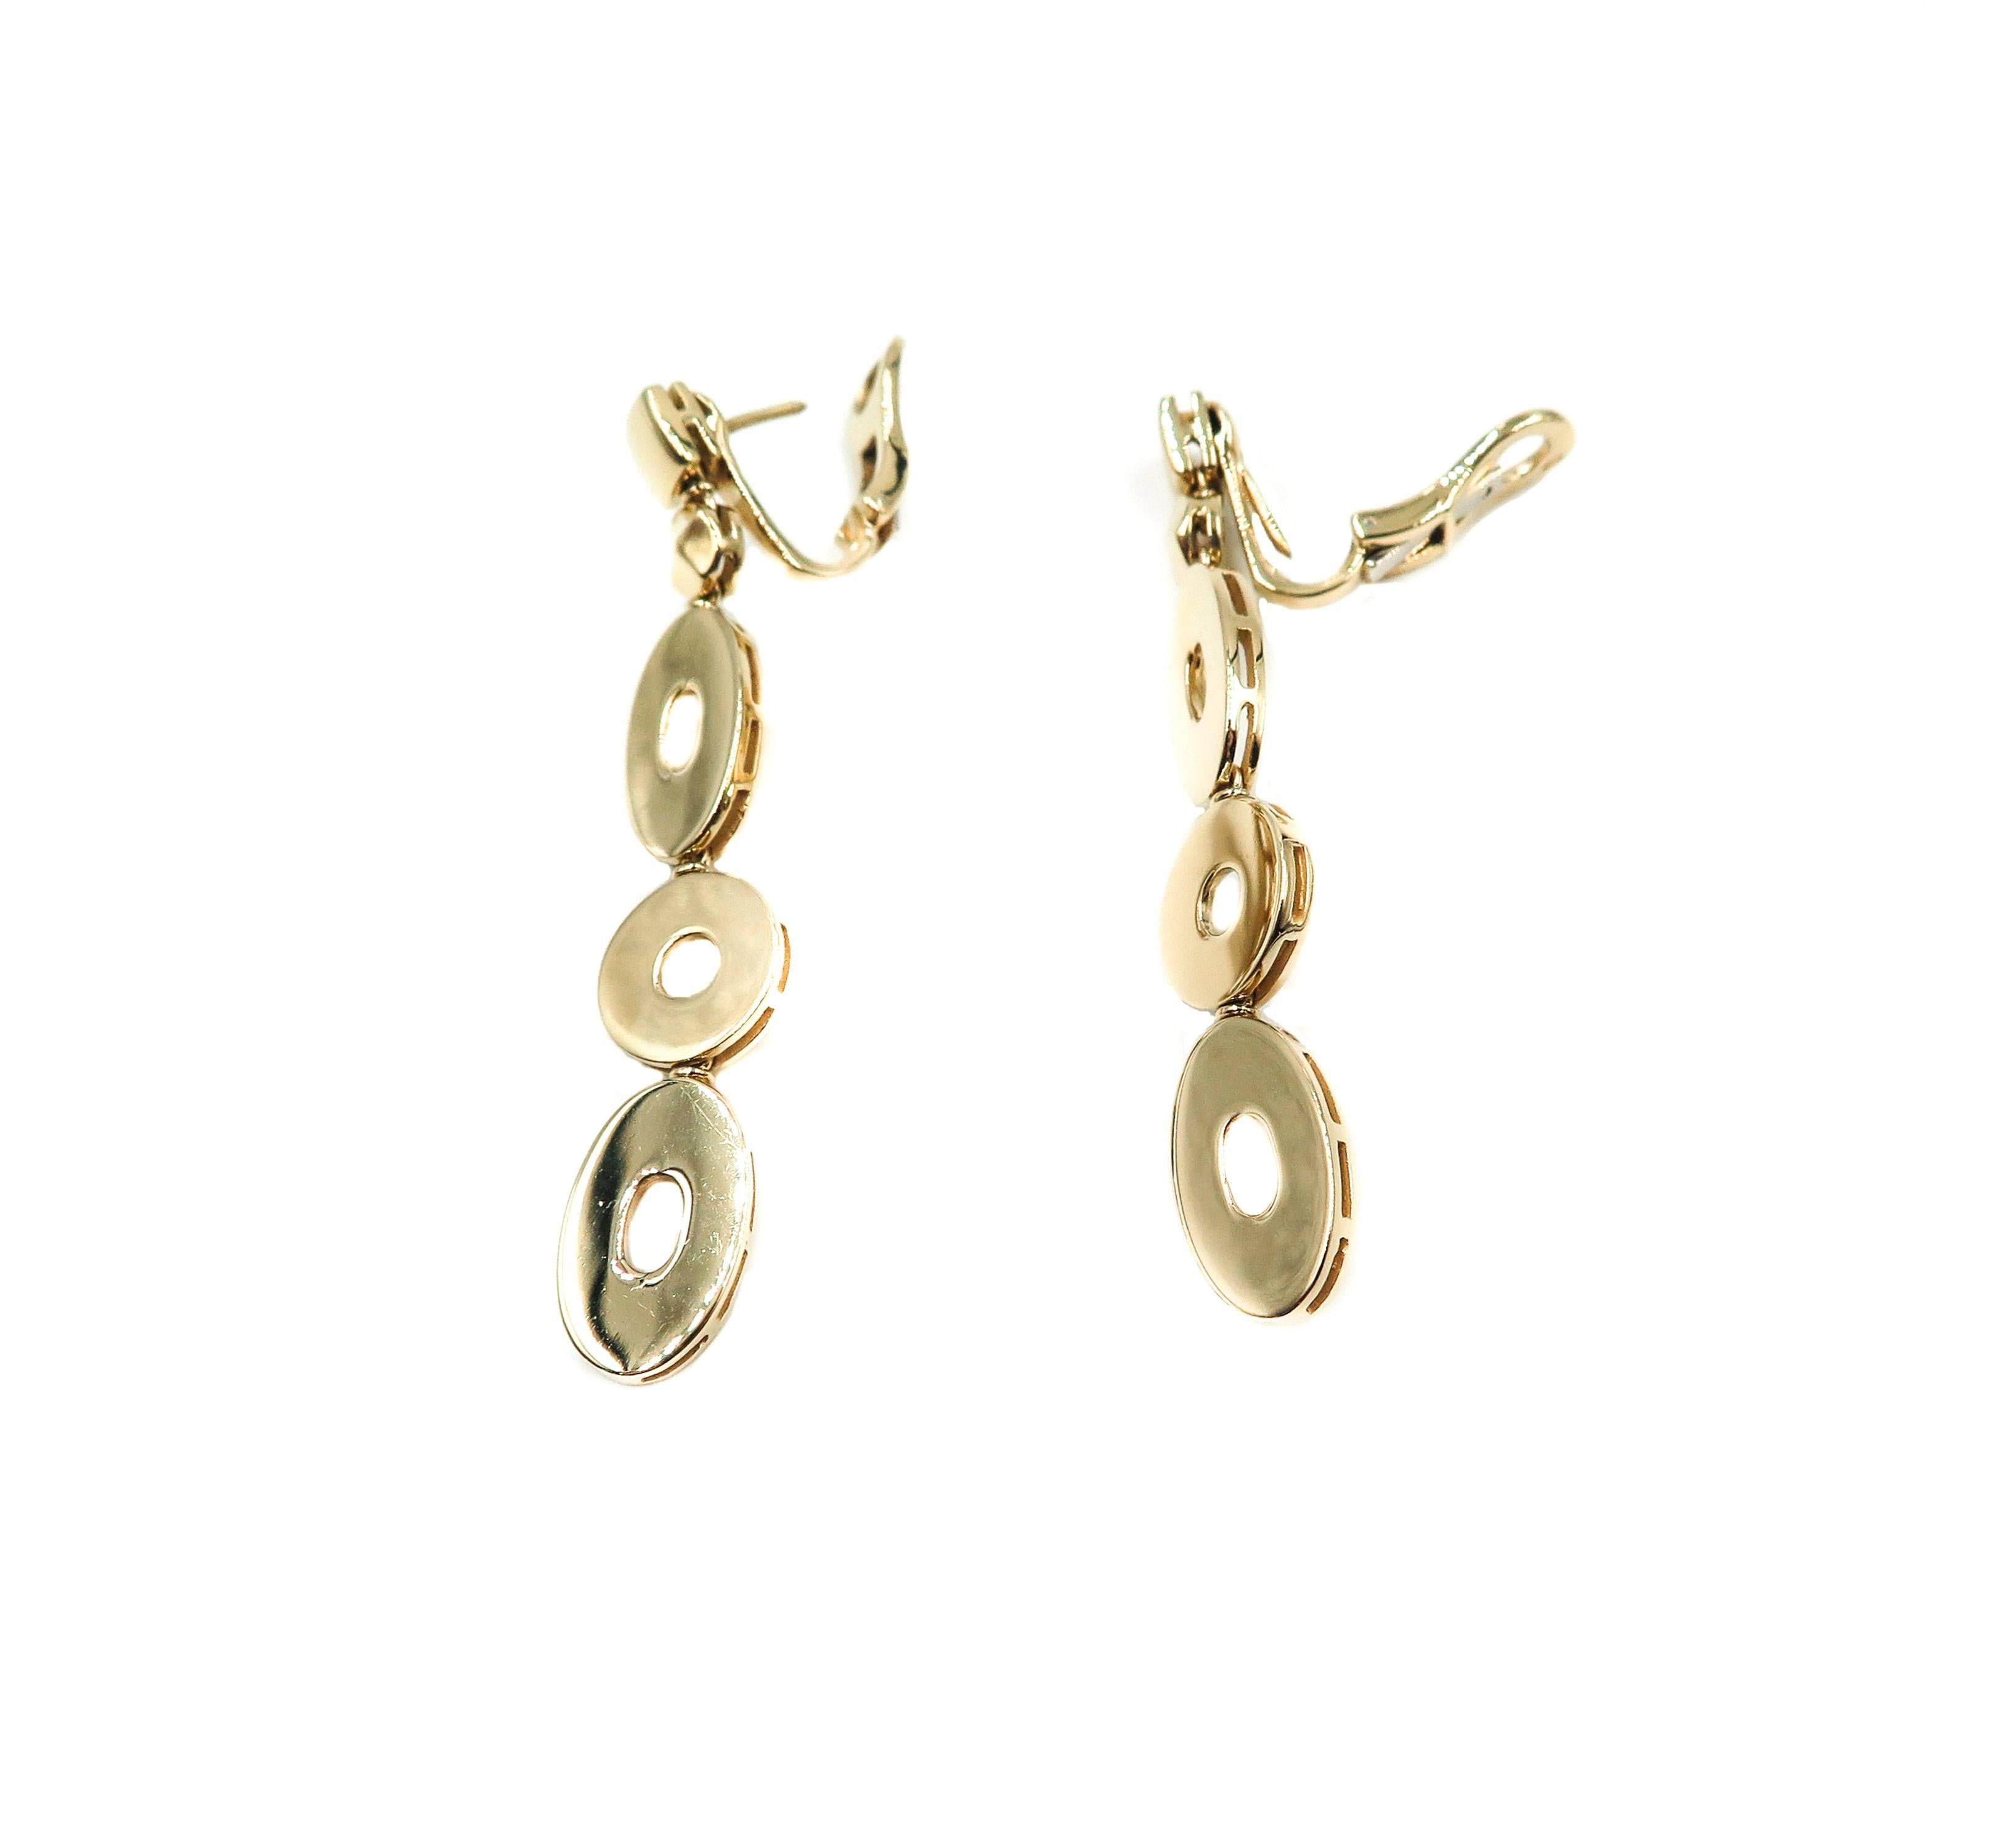 Absolutely beautiful, these earrings can be worn everyday and with everything!
Clean and tailored look to complement any outfit... great to wear casual with jeans or dress it up. 
Crafted in 18k yellow gold with a high polished and a clip earring